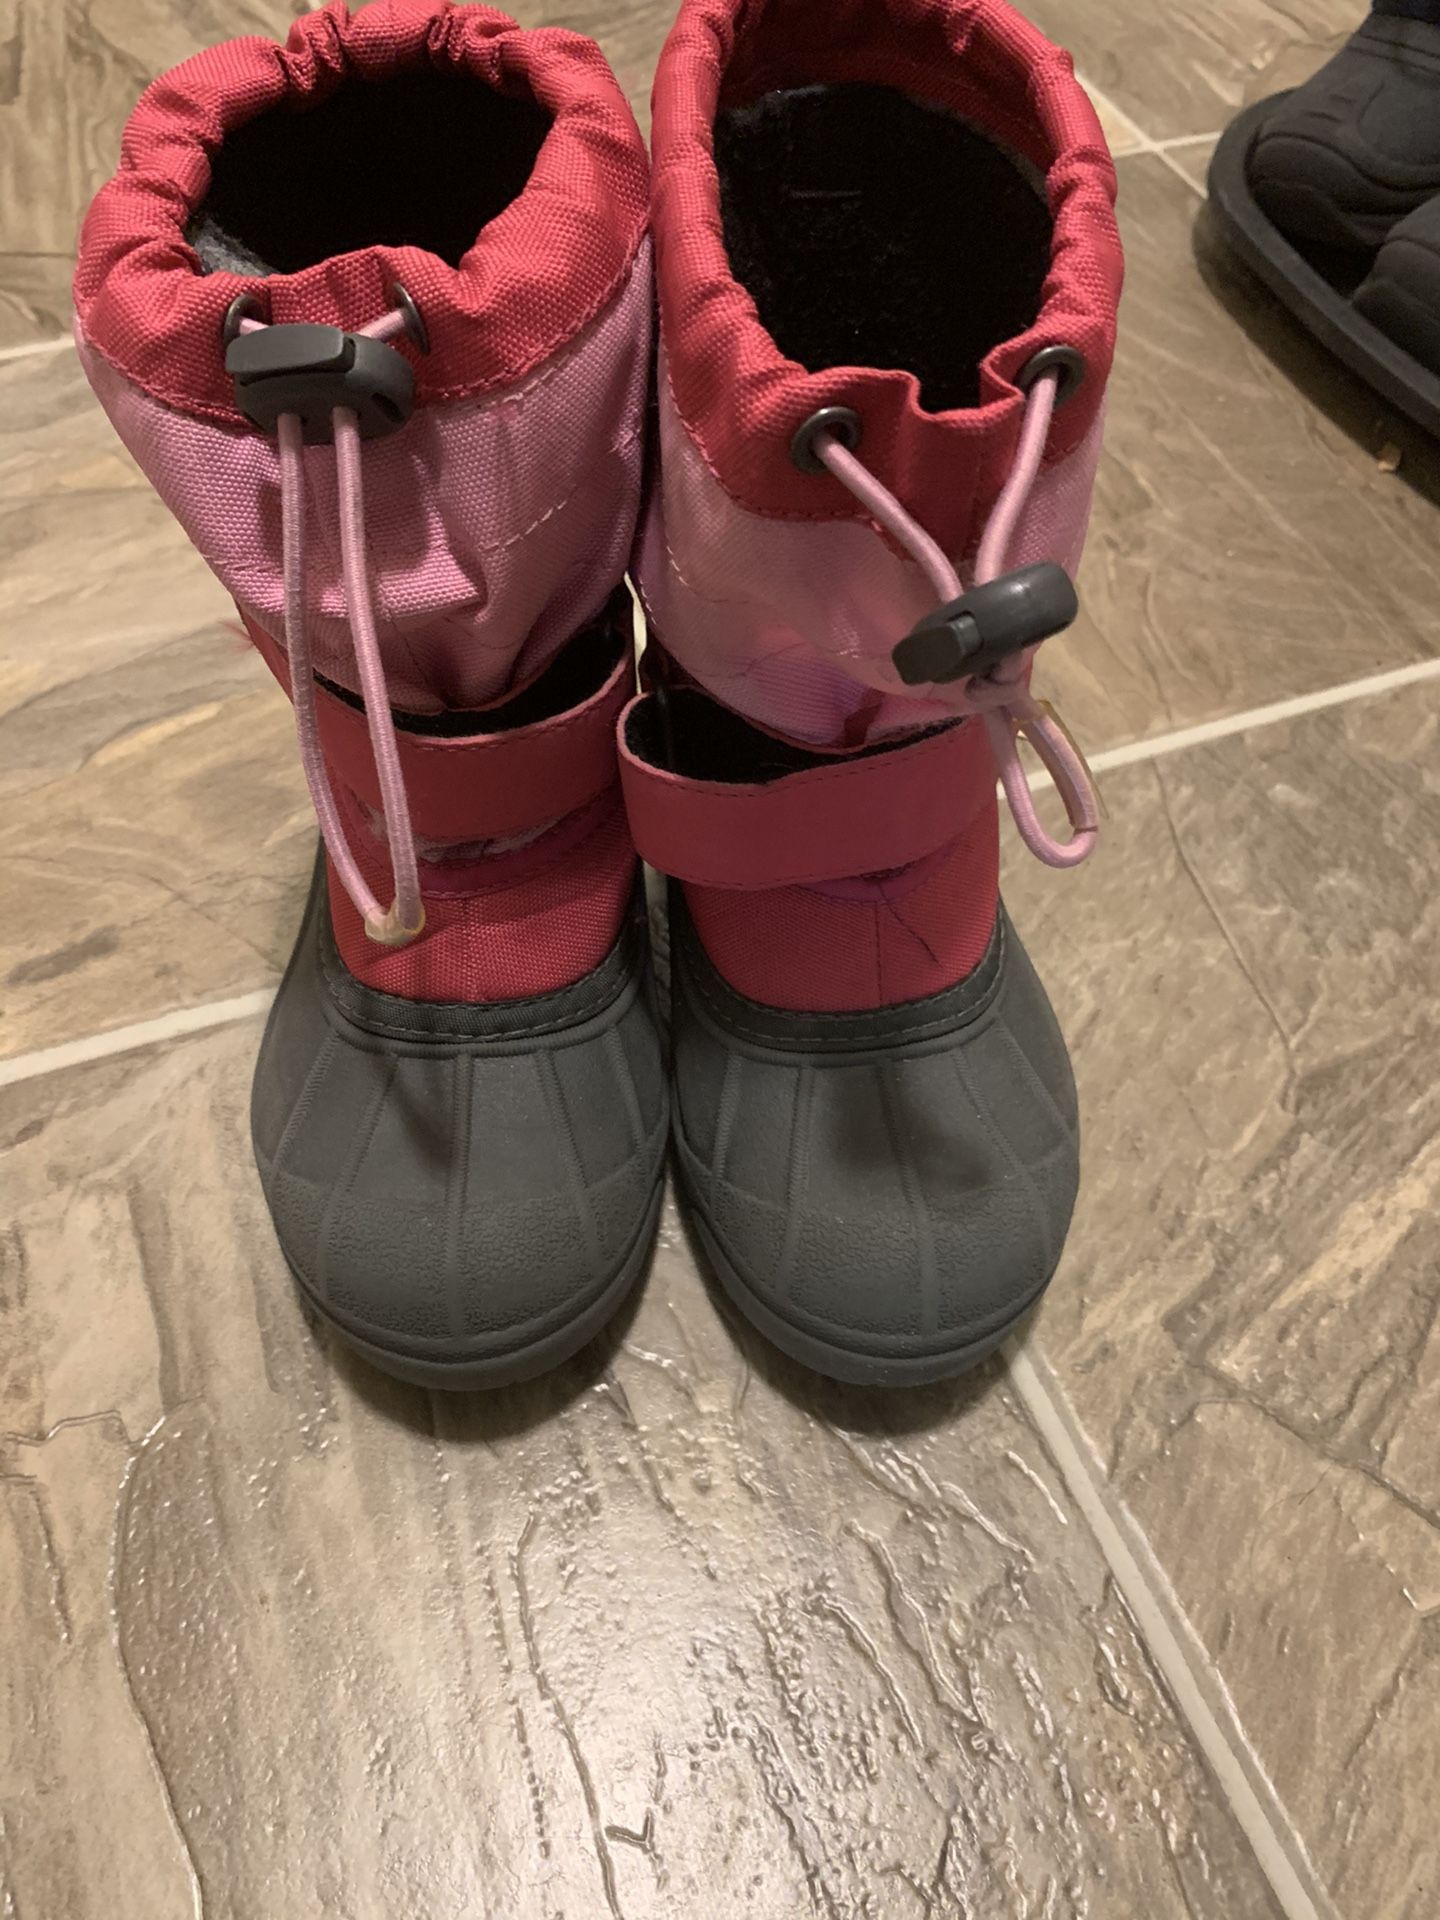 Girls size 9 Columbia Snow boots